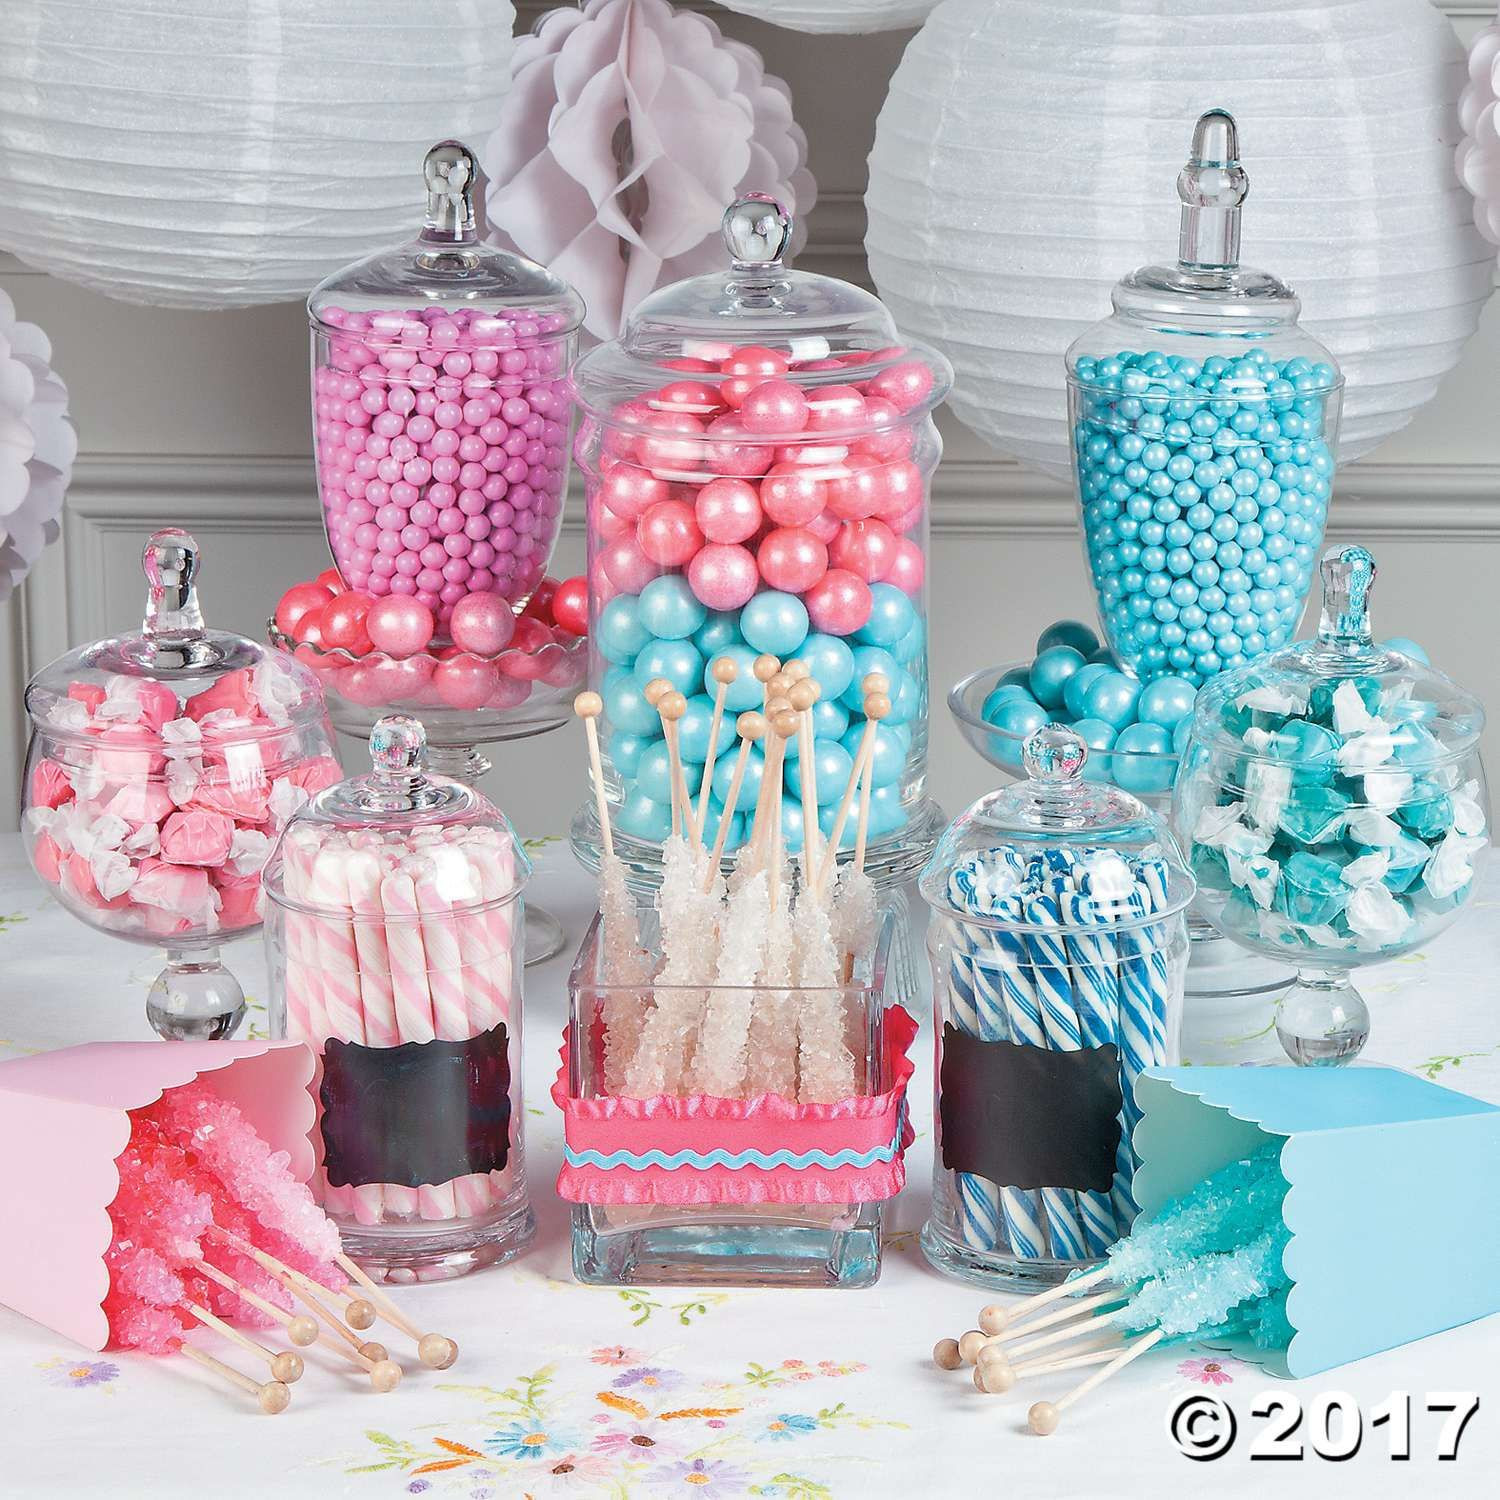 Decoration Ideas For Gender Reveal Party
 Gender Reveal Party 42 mybabydoo